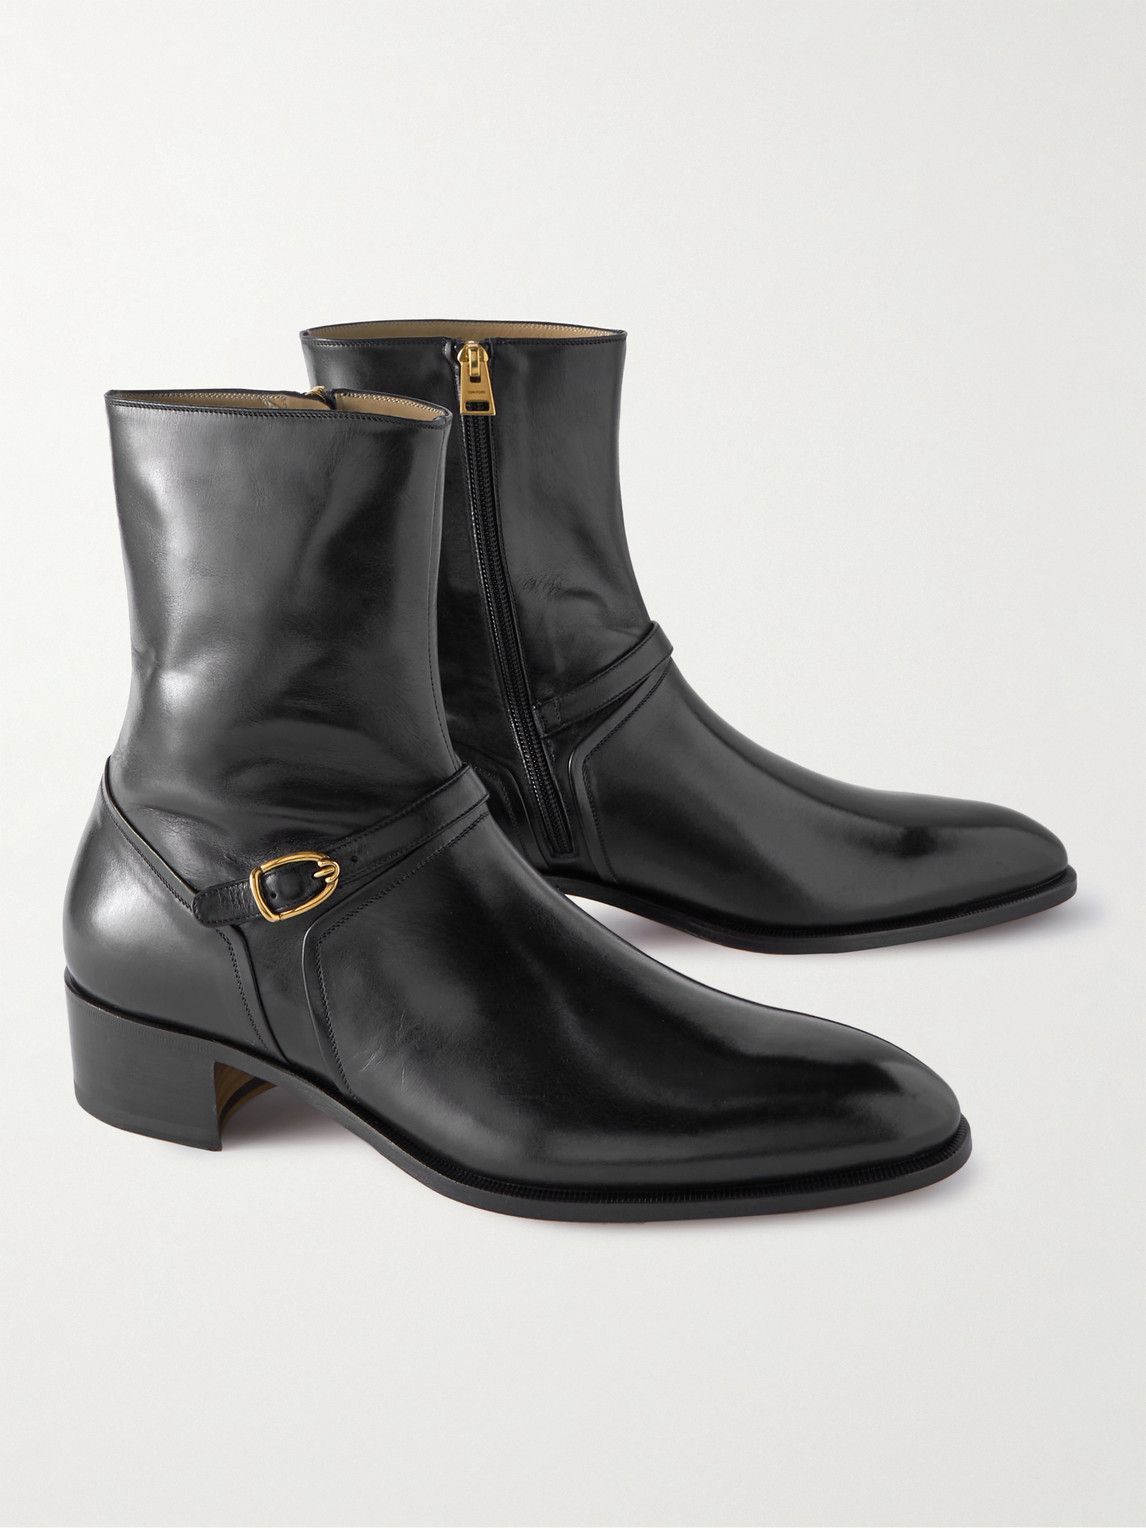 TOM FORD - Buckled Polished-Leather Boots - Black TOM FORD